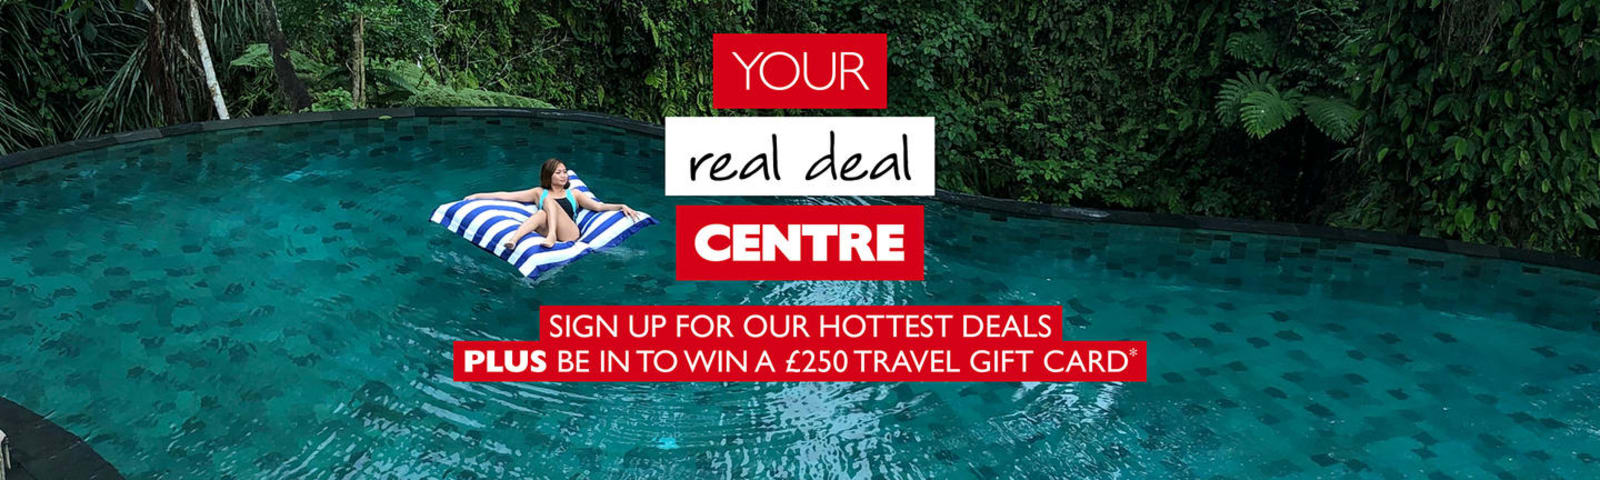 Sign up for our hottest deals plus be in to win a £250 travel gift card